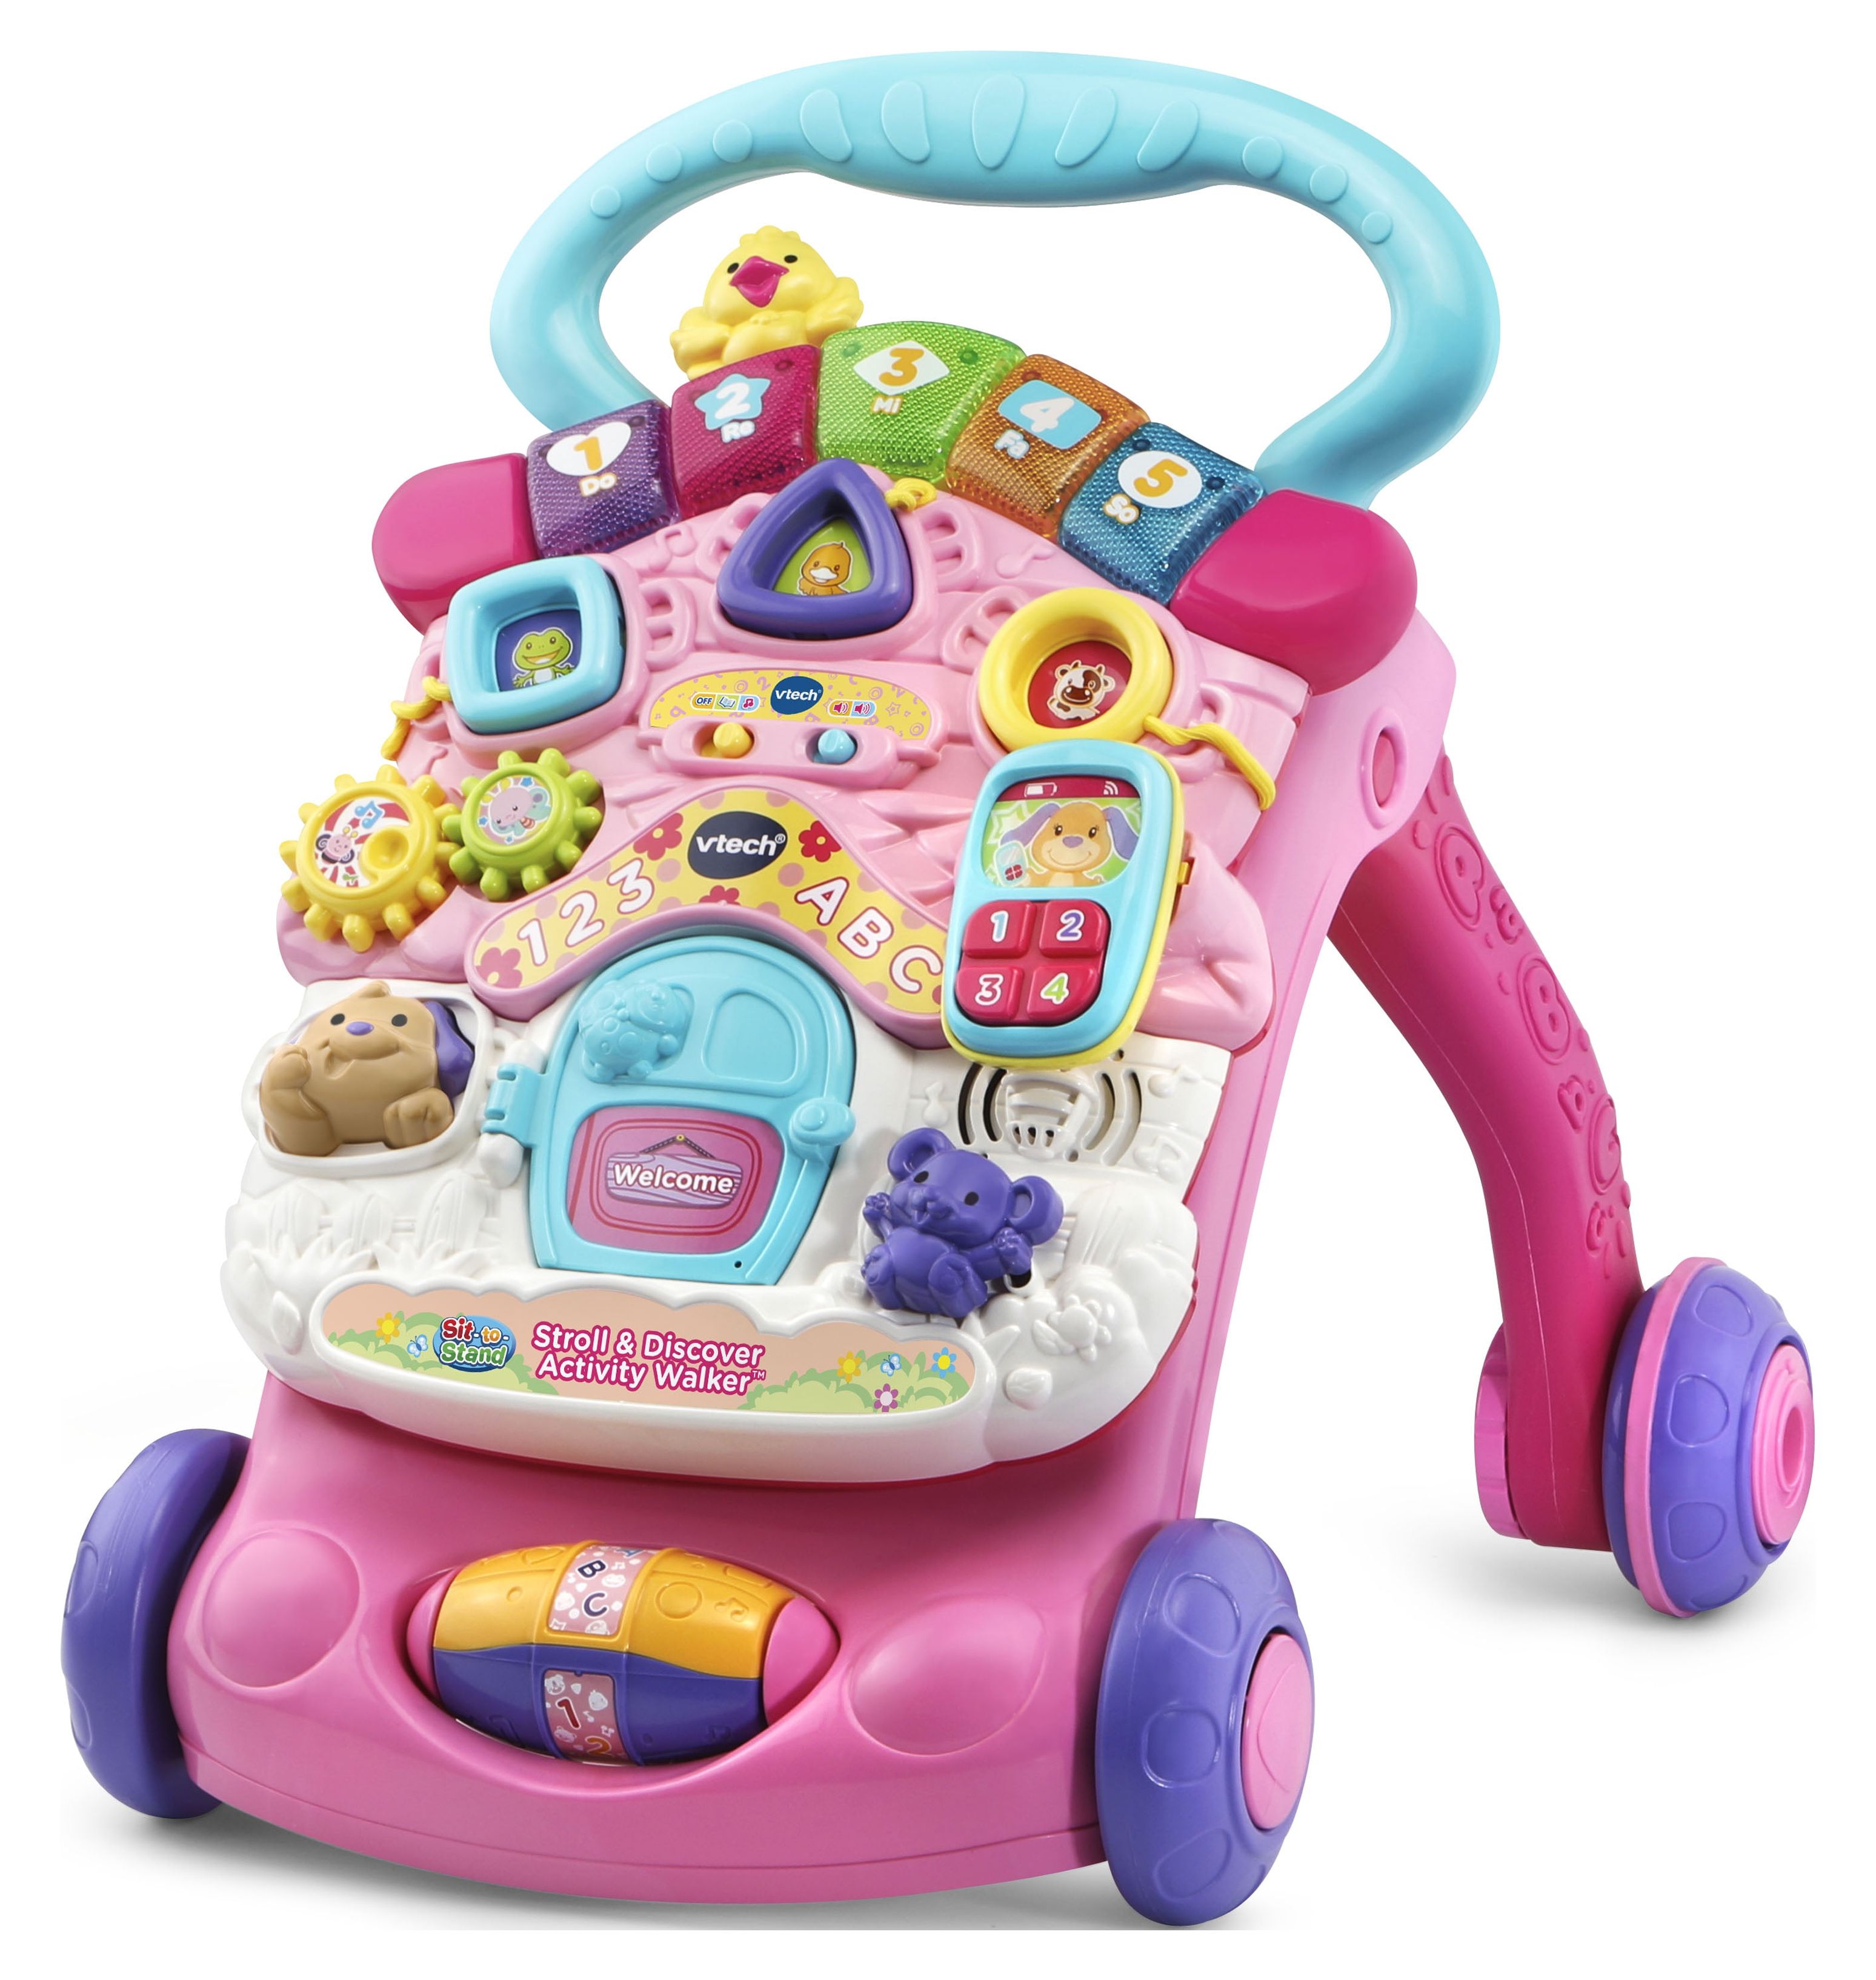 VTech® Stroll & Discover Activity Walker™ 2 -in-1 Pink Toddler Toy 9–36 months - image 4 of 5